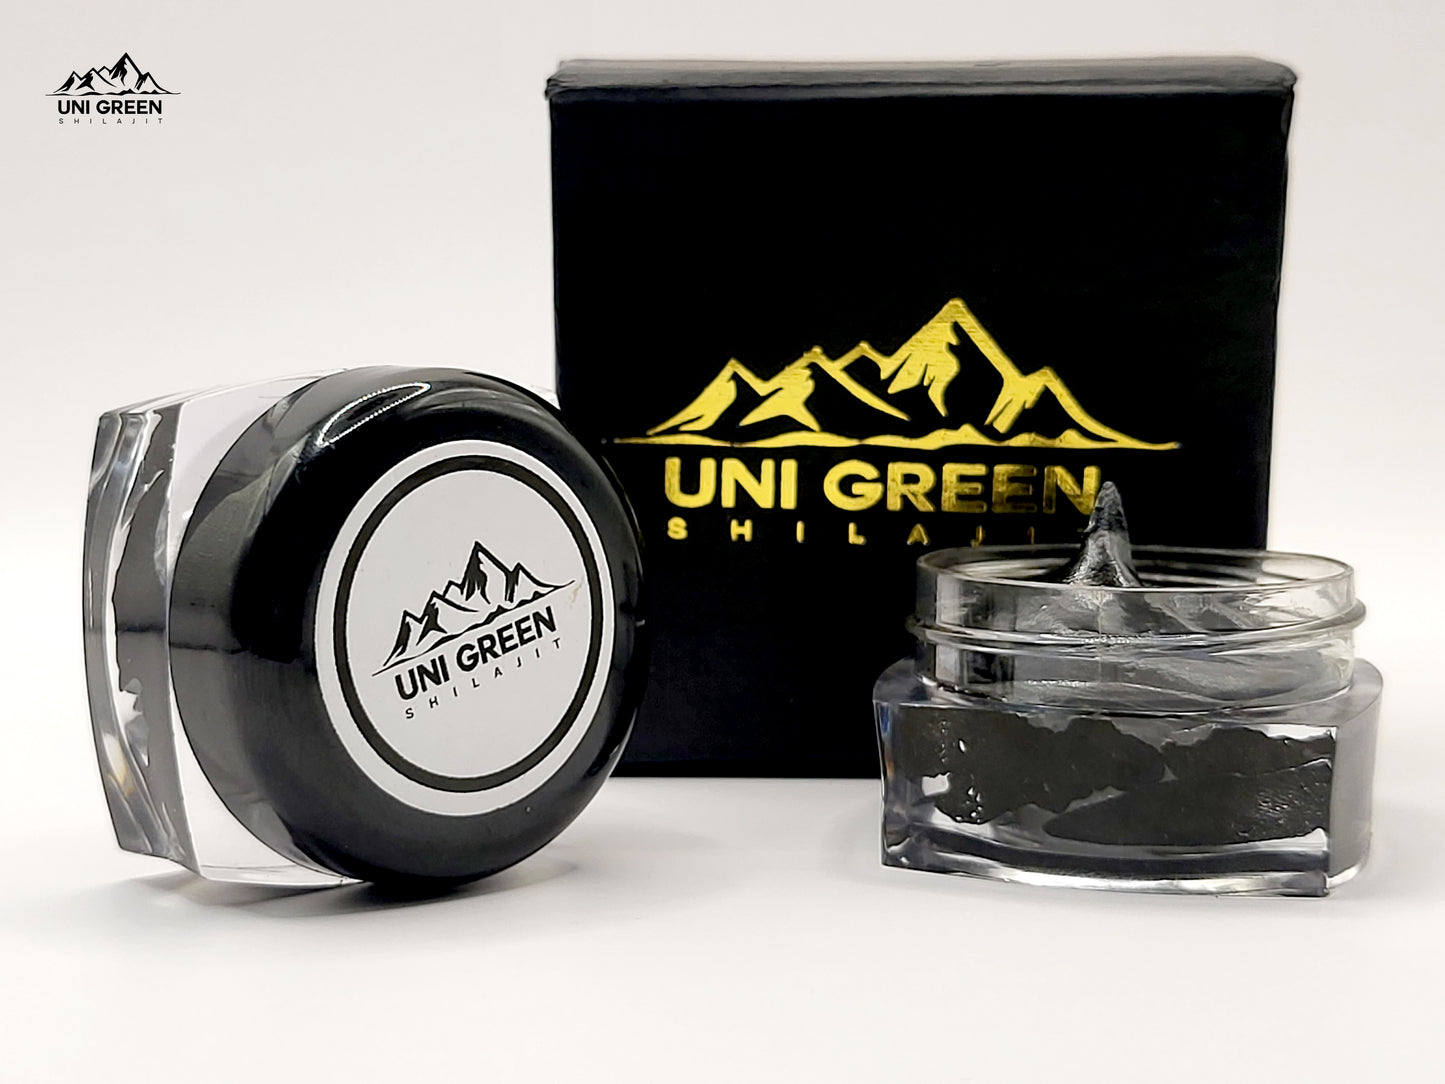 Unigreen Shilajit: A premium blend from the Himalayas, promoting wellness and vitality for a balanced and healthy lifestyle.